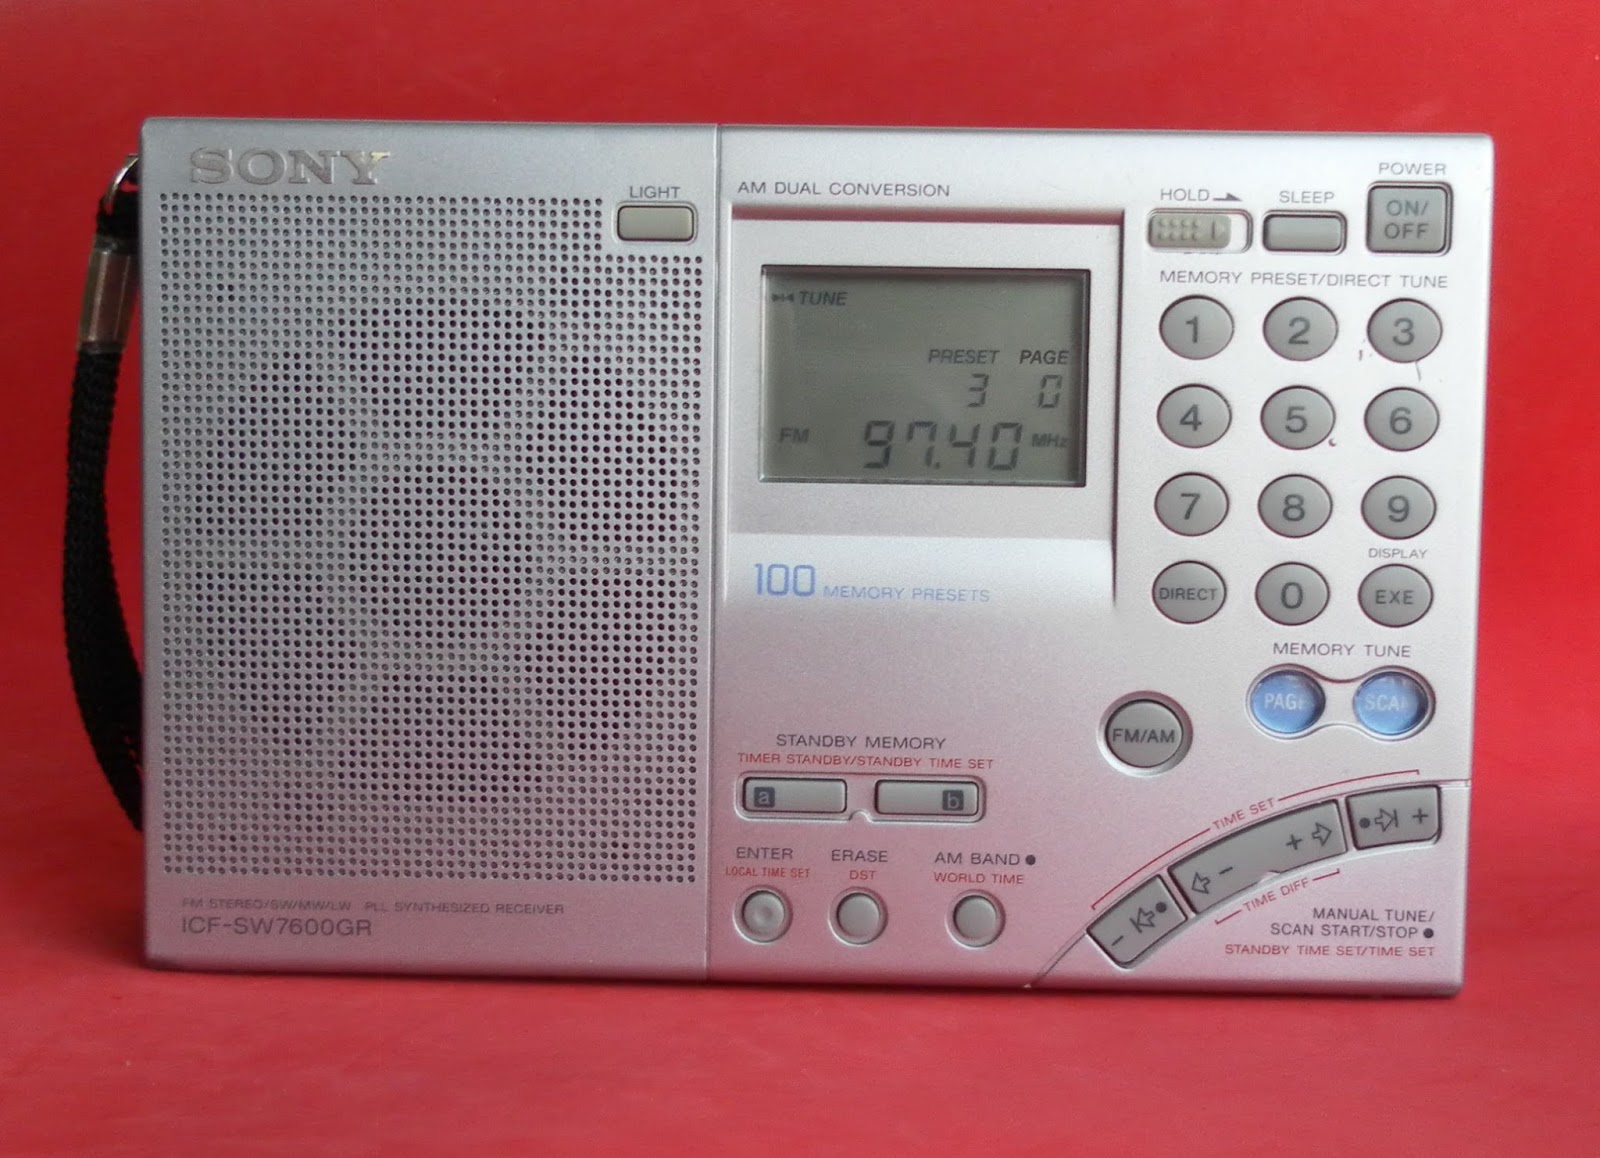 HP Forums - Sony ICF-SW7600GR Multi Band World Receiver Radio: Who 